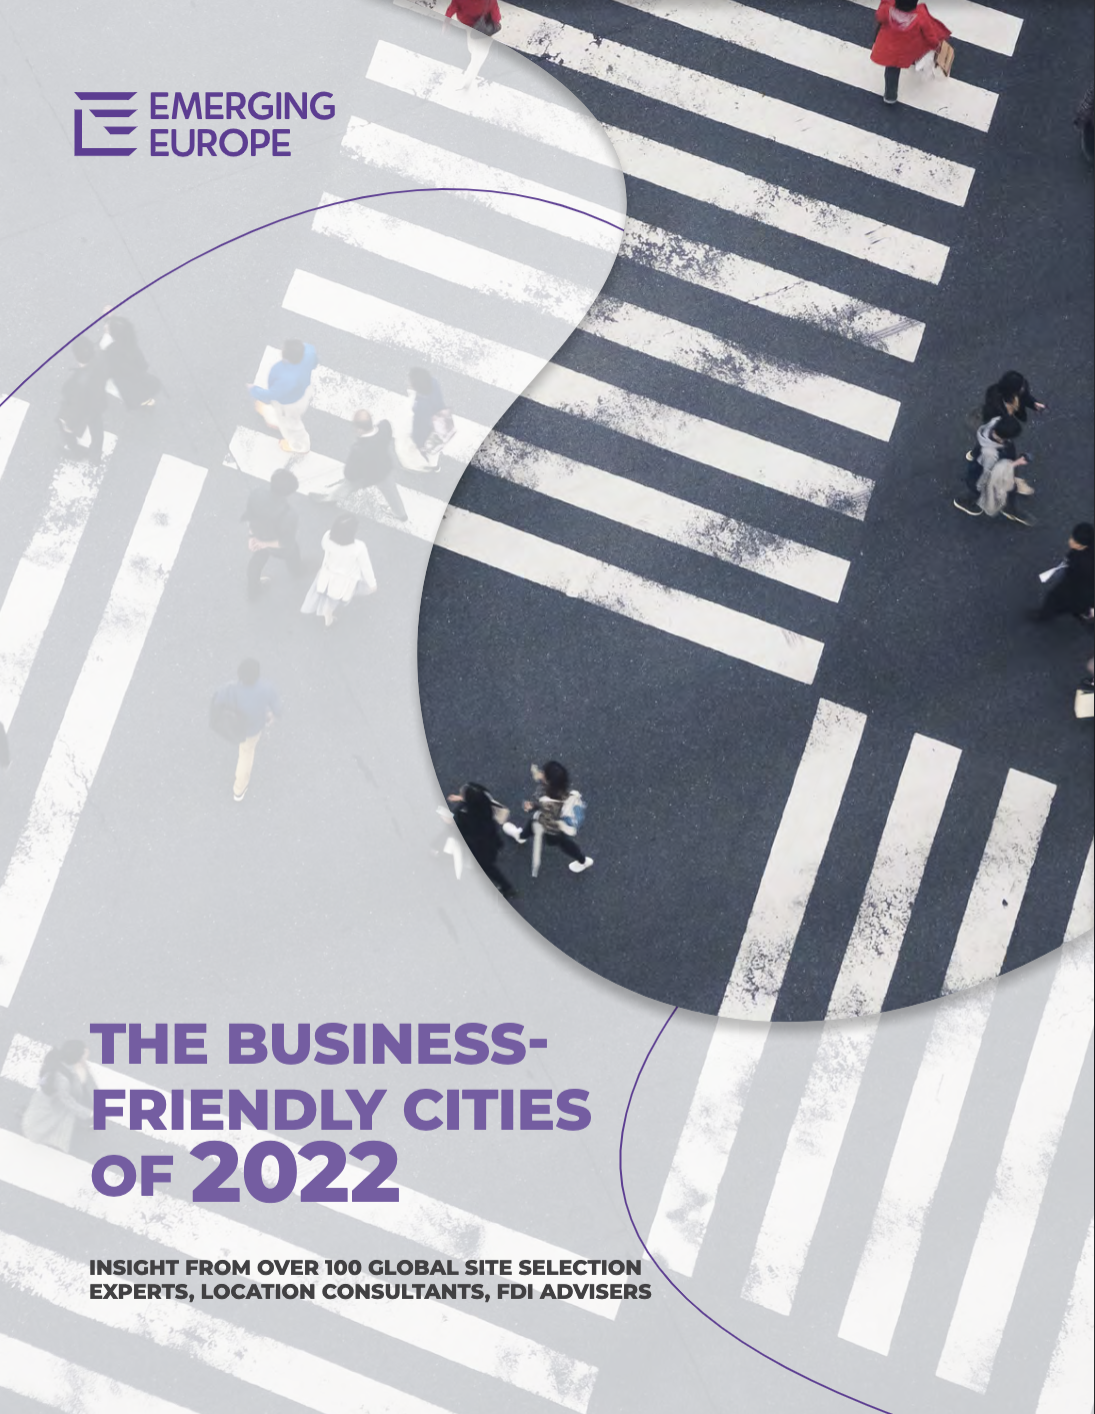 The Business-Friendly Cities of 2022